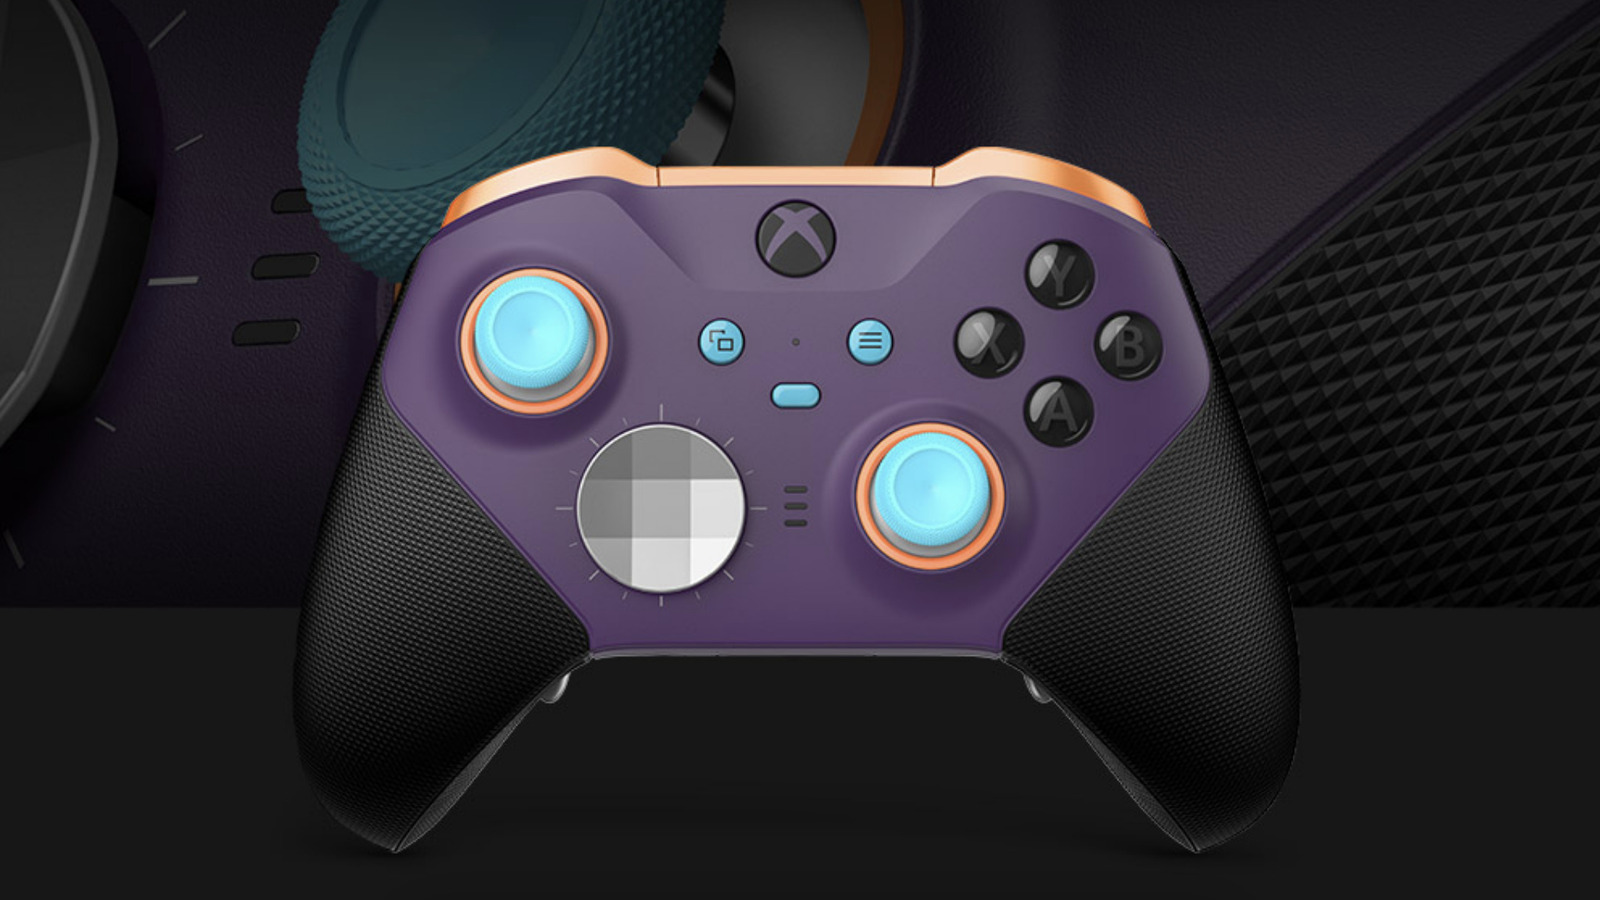 The Xbox Elite Series 2 controller is now customizable in Design Lab